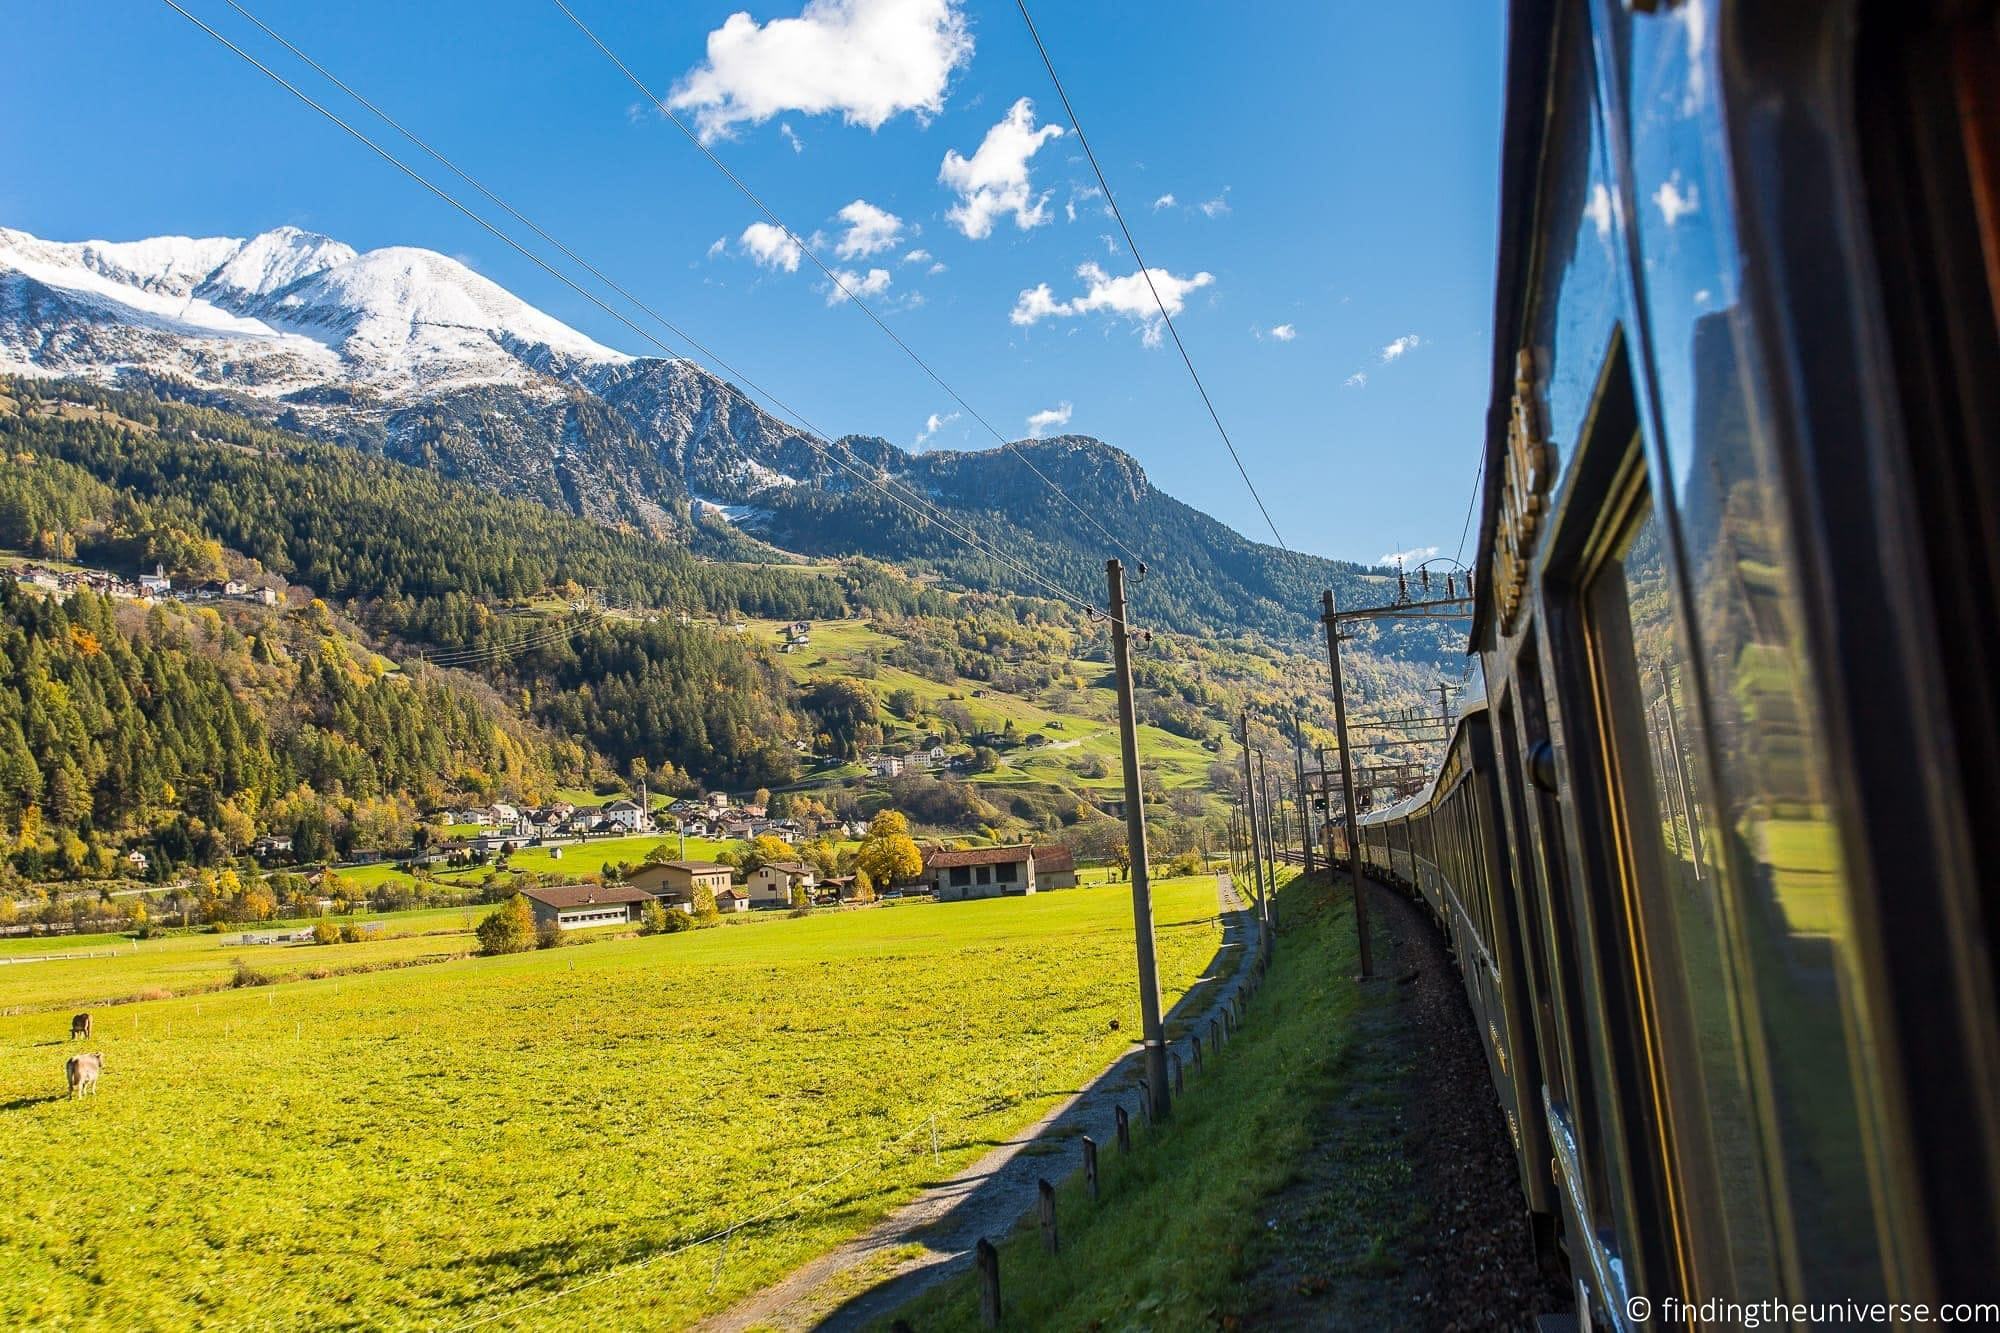 Images of the Venice Simplon-Orient-Express